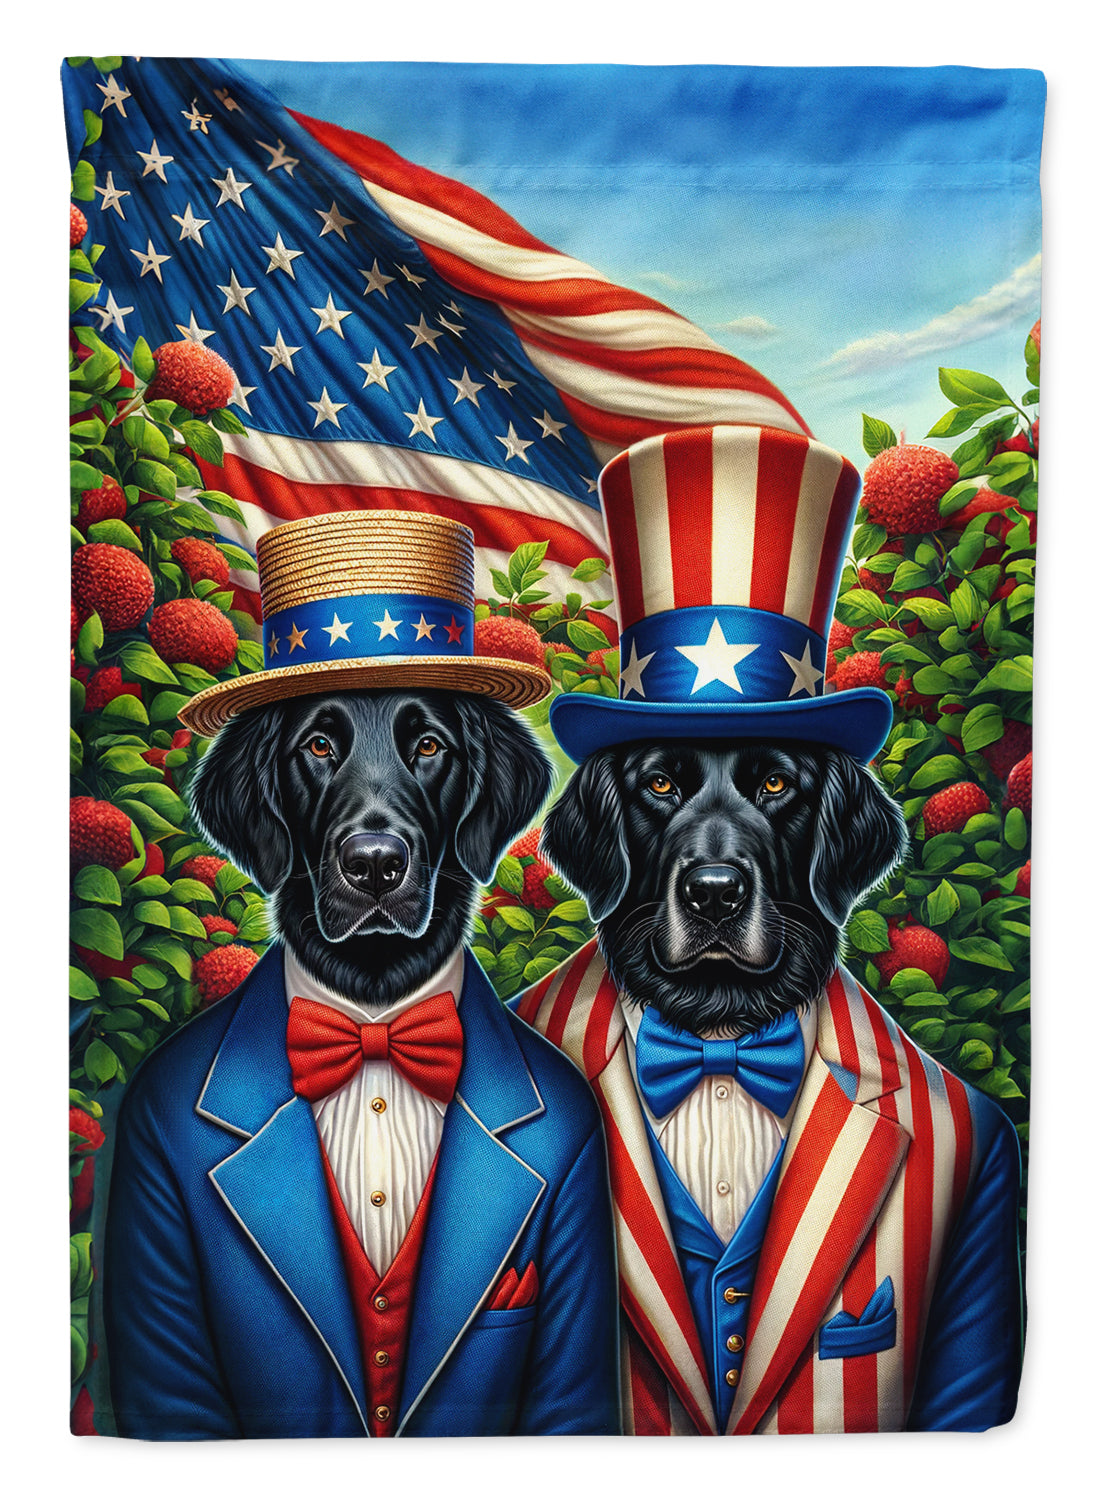 Buy this All American Flat-Coated Retriever House Flag